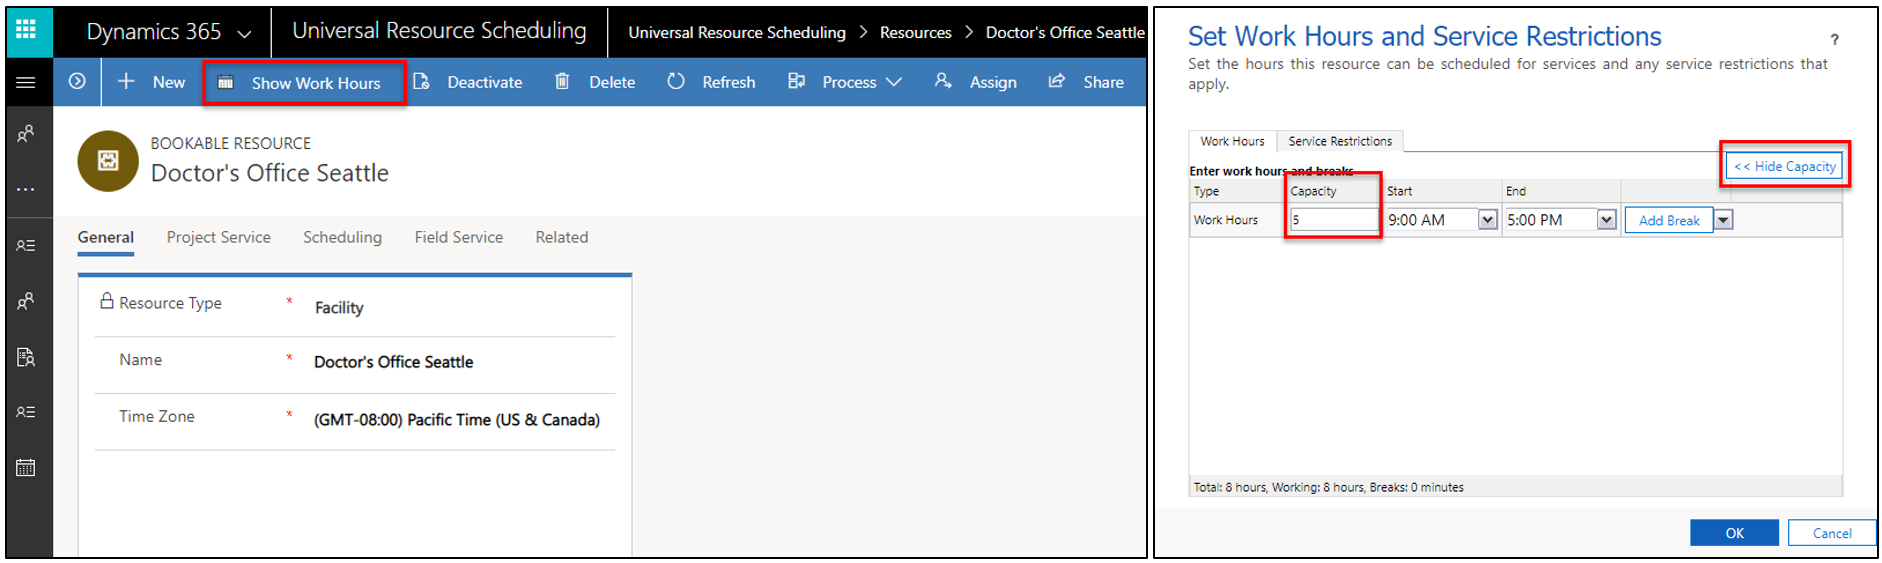 Screenshot of adding capacity to a facility resource in working hours.